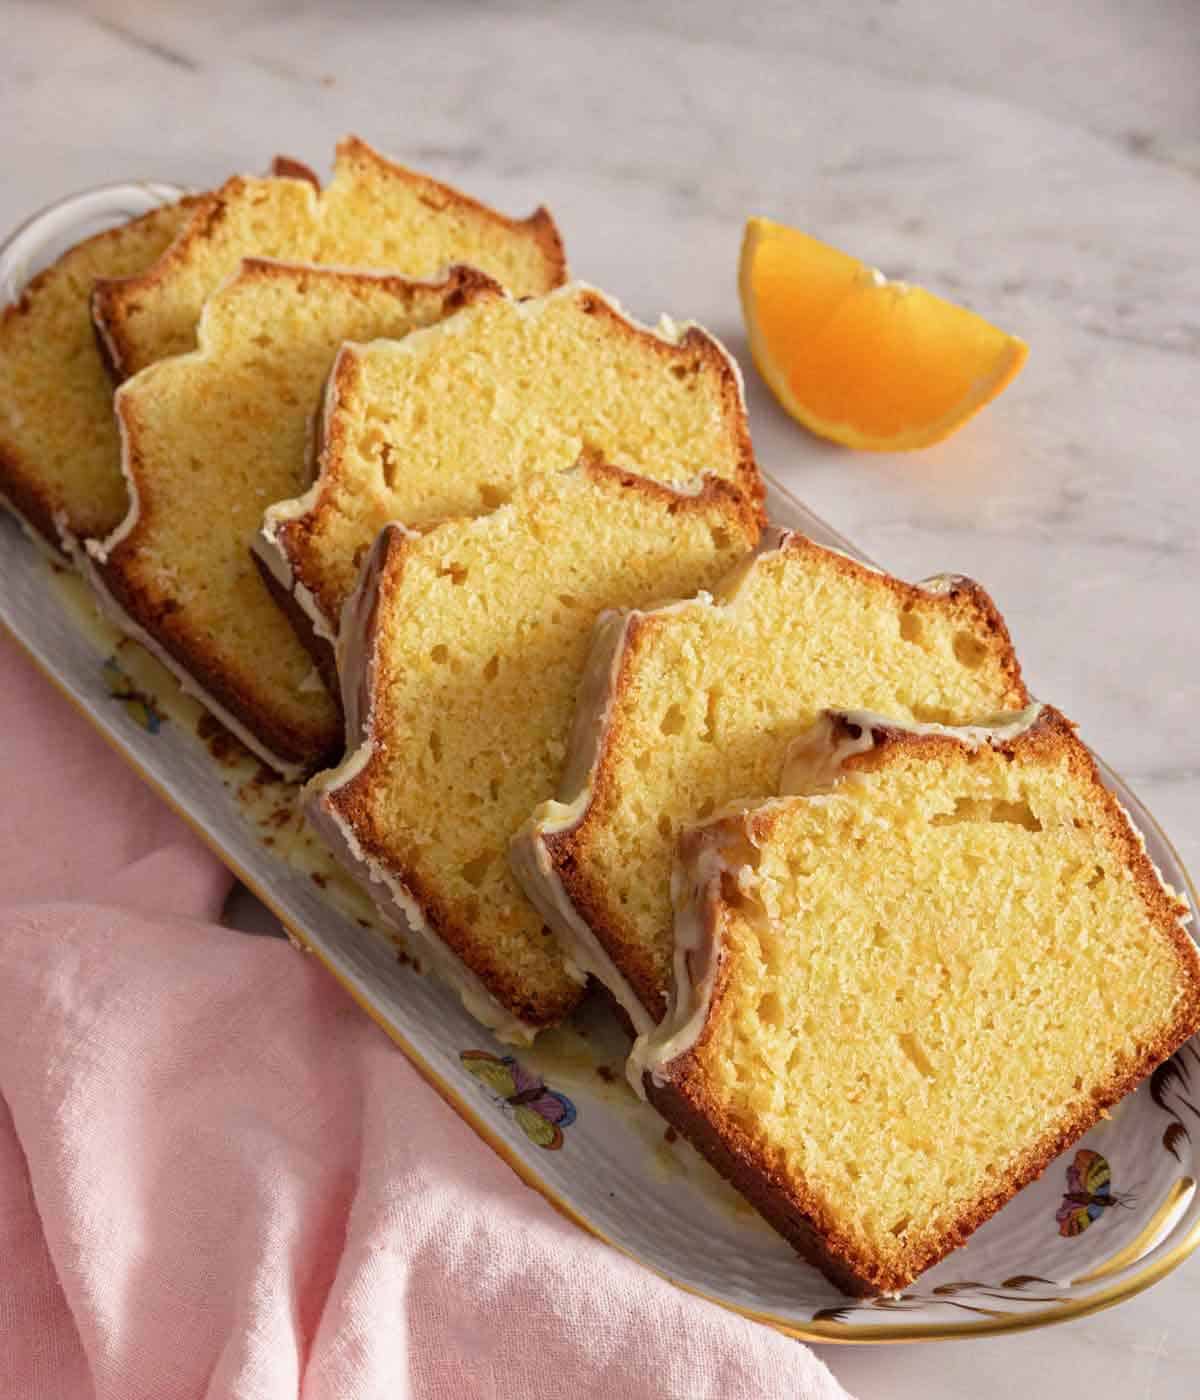 A long plate with slices of orange cake with a fresh orange wedge beside it.